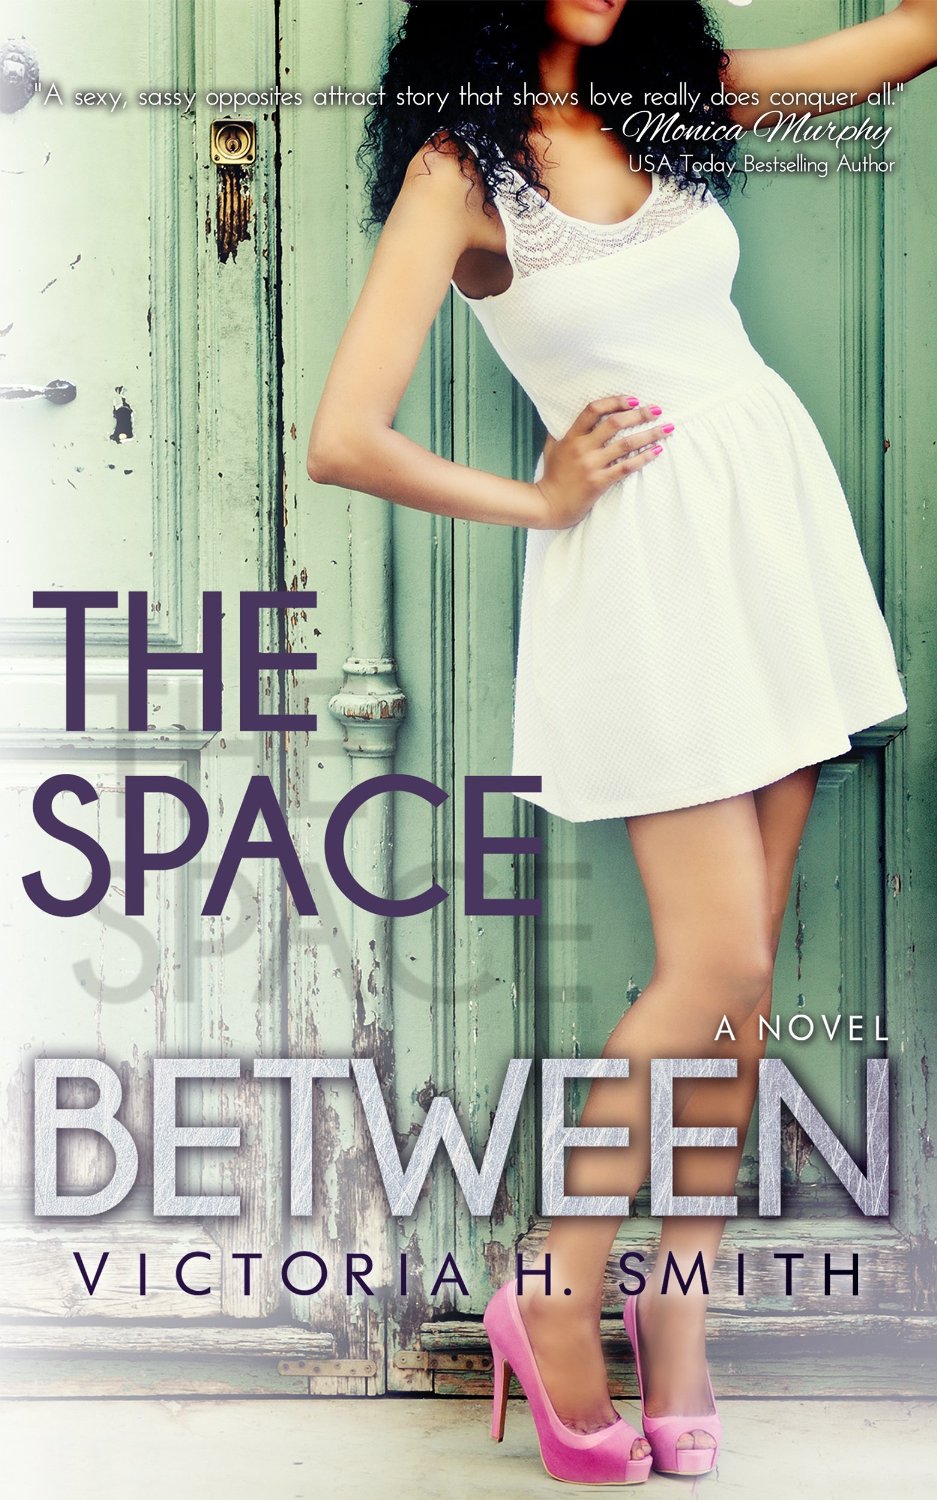 The Space Between by Victoria H. Smith